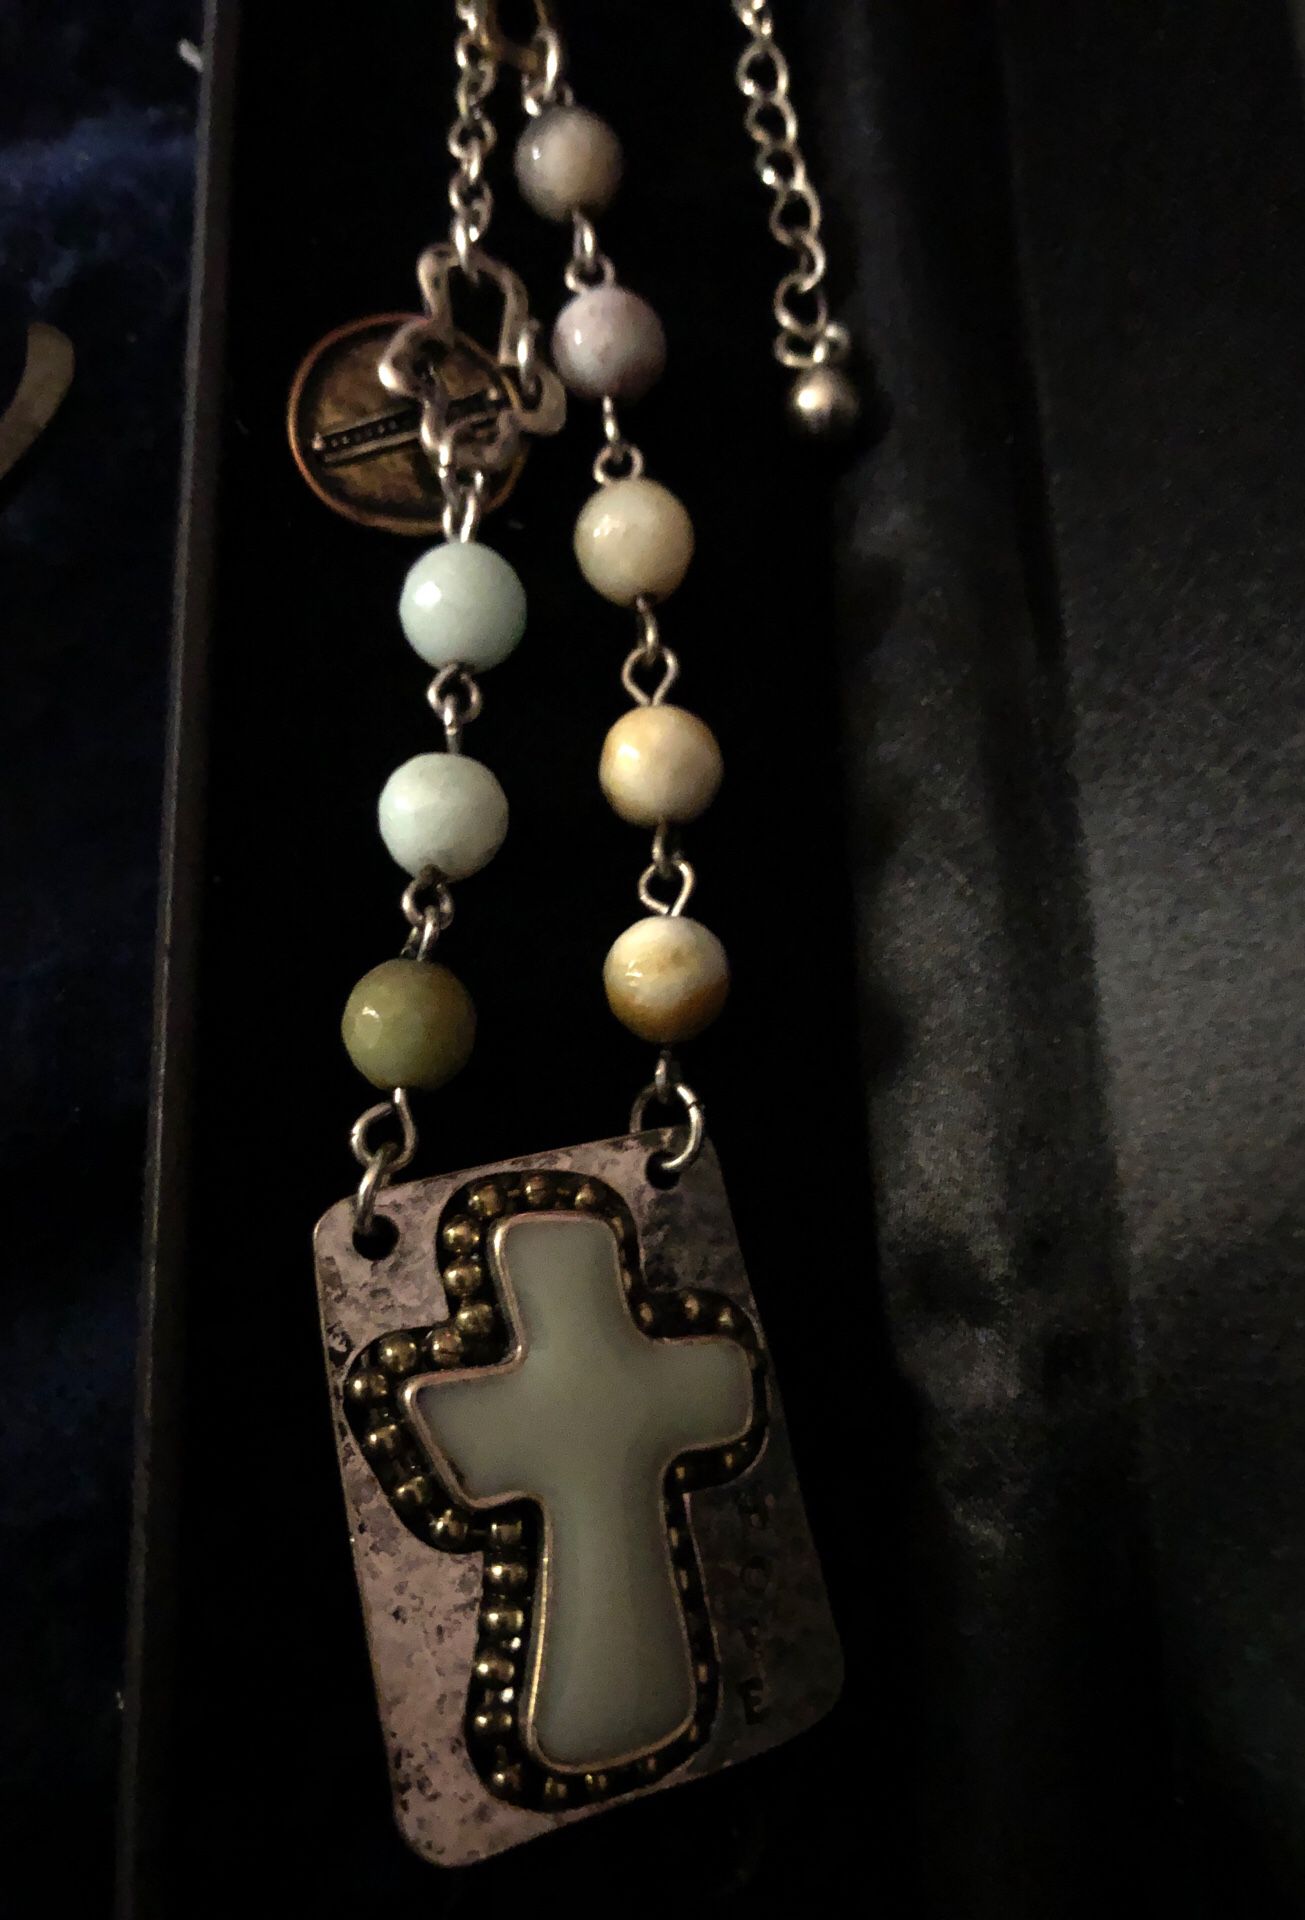 Necklace silver an jade cross get this for a gift